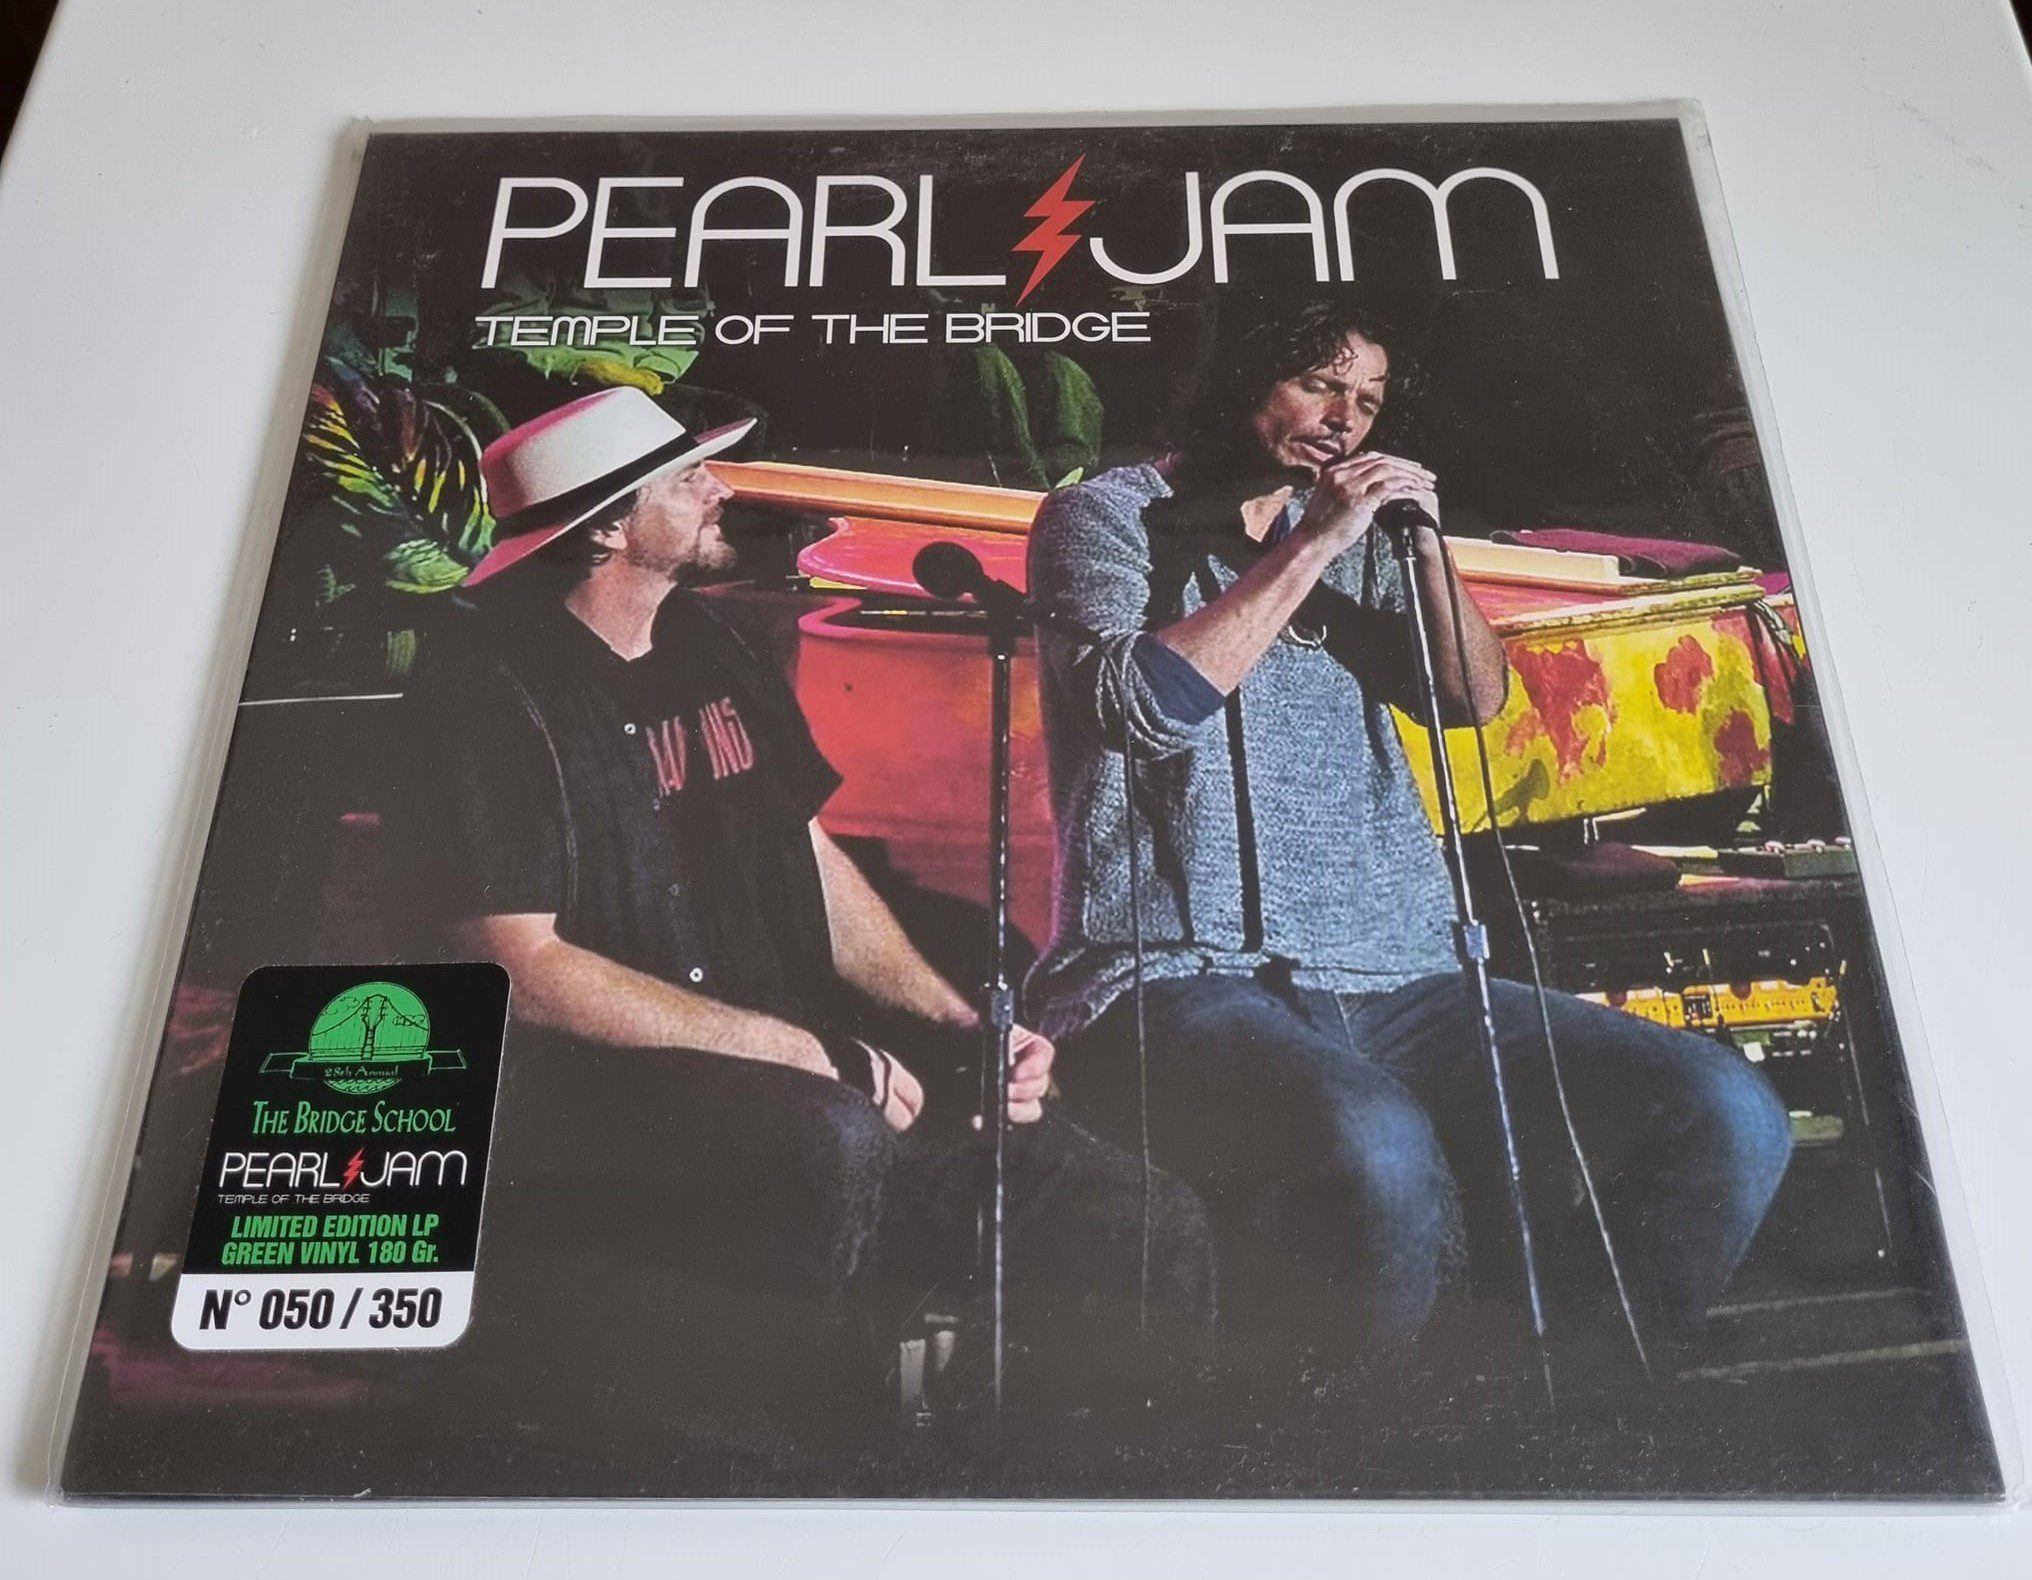 Buy this rare pearl Jam record by clicking here